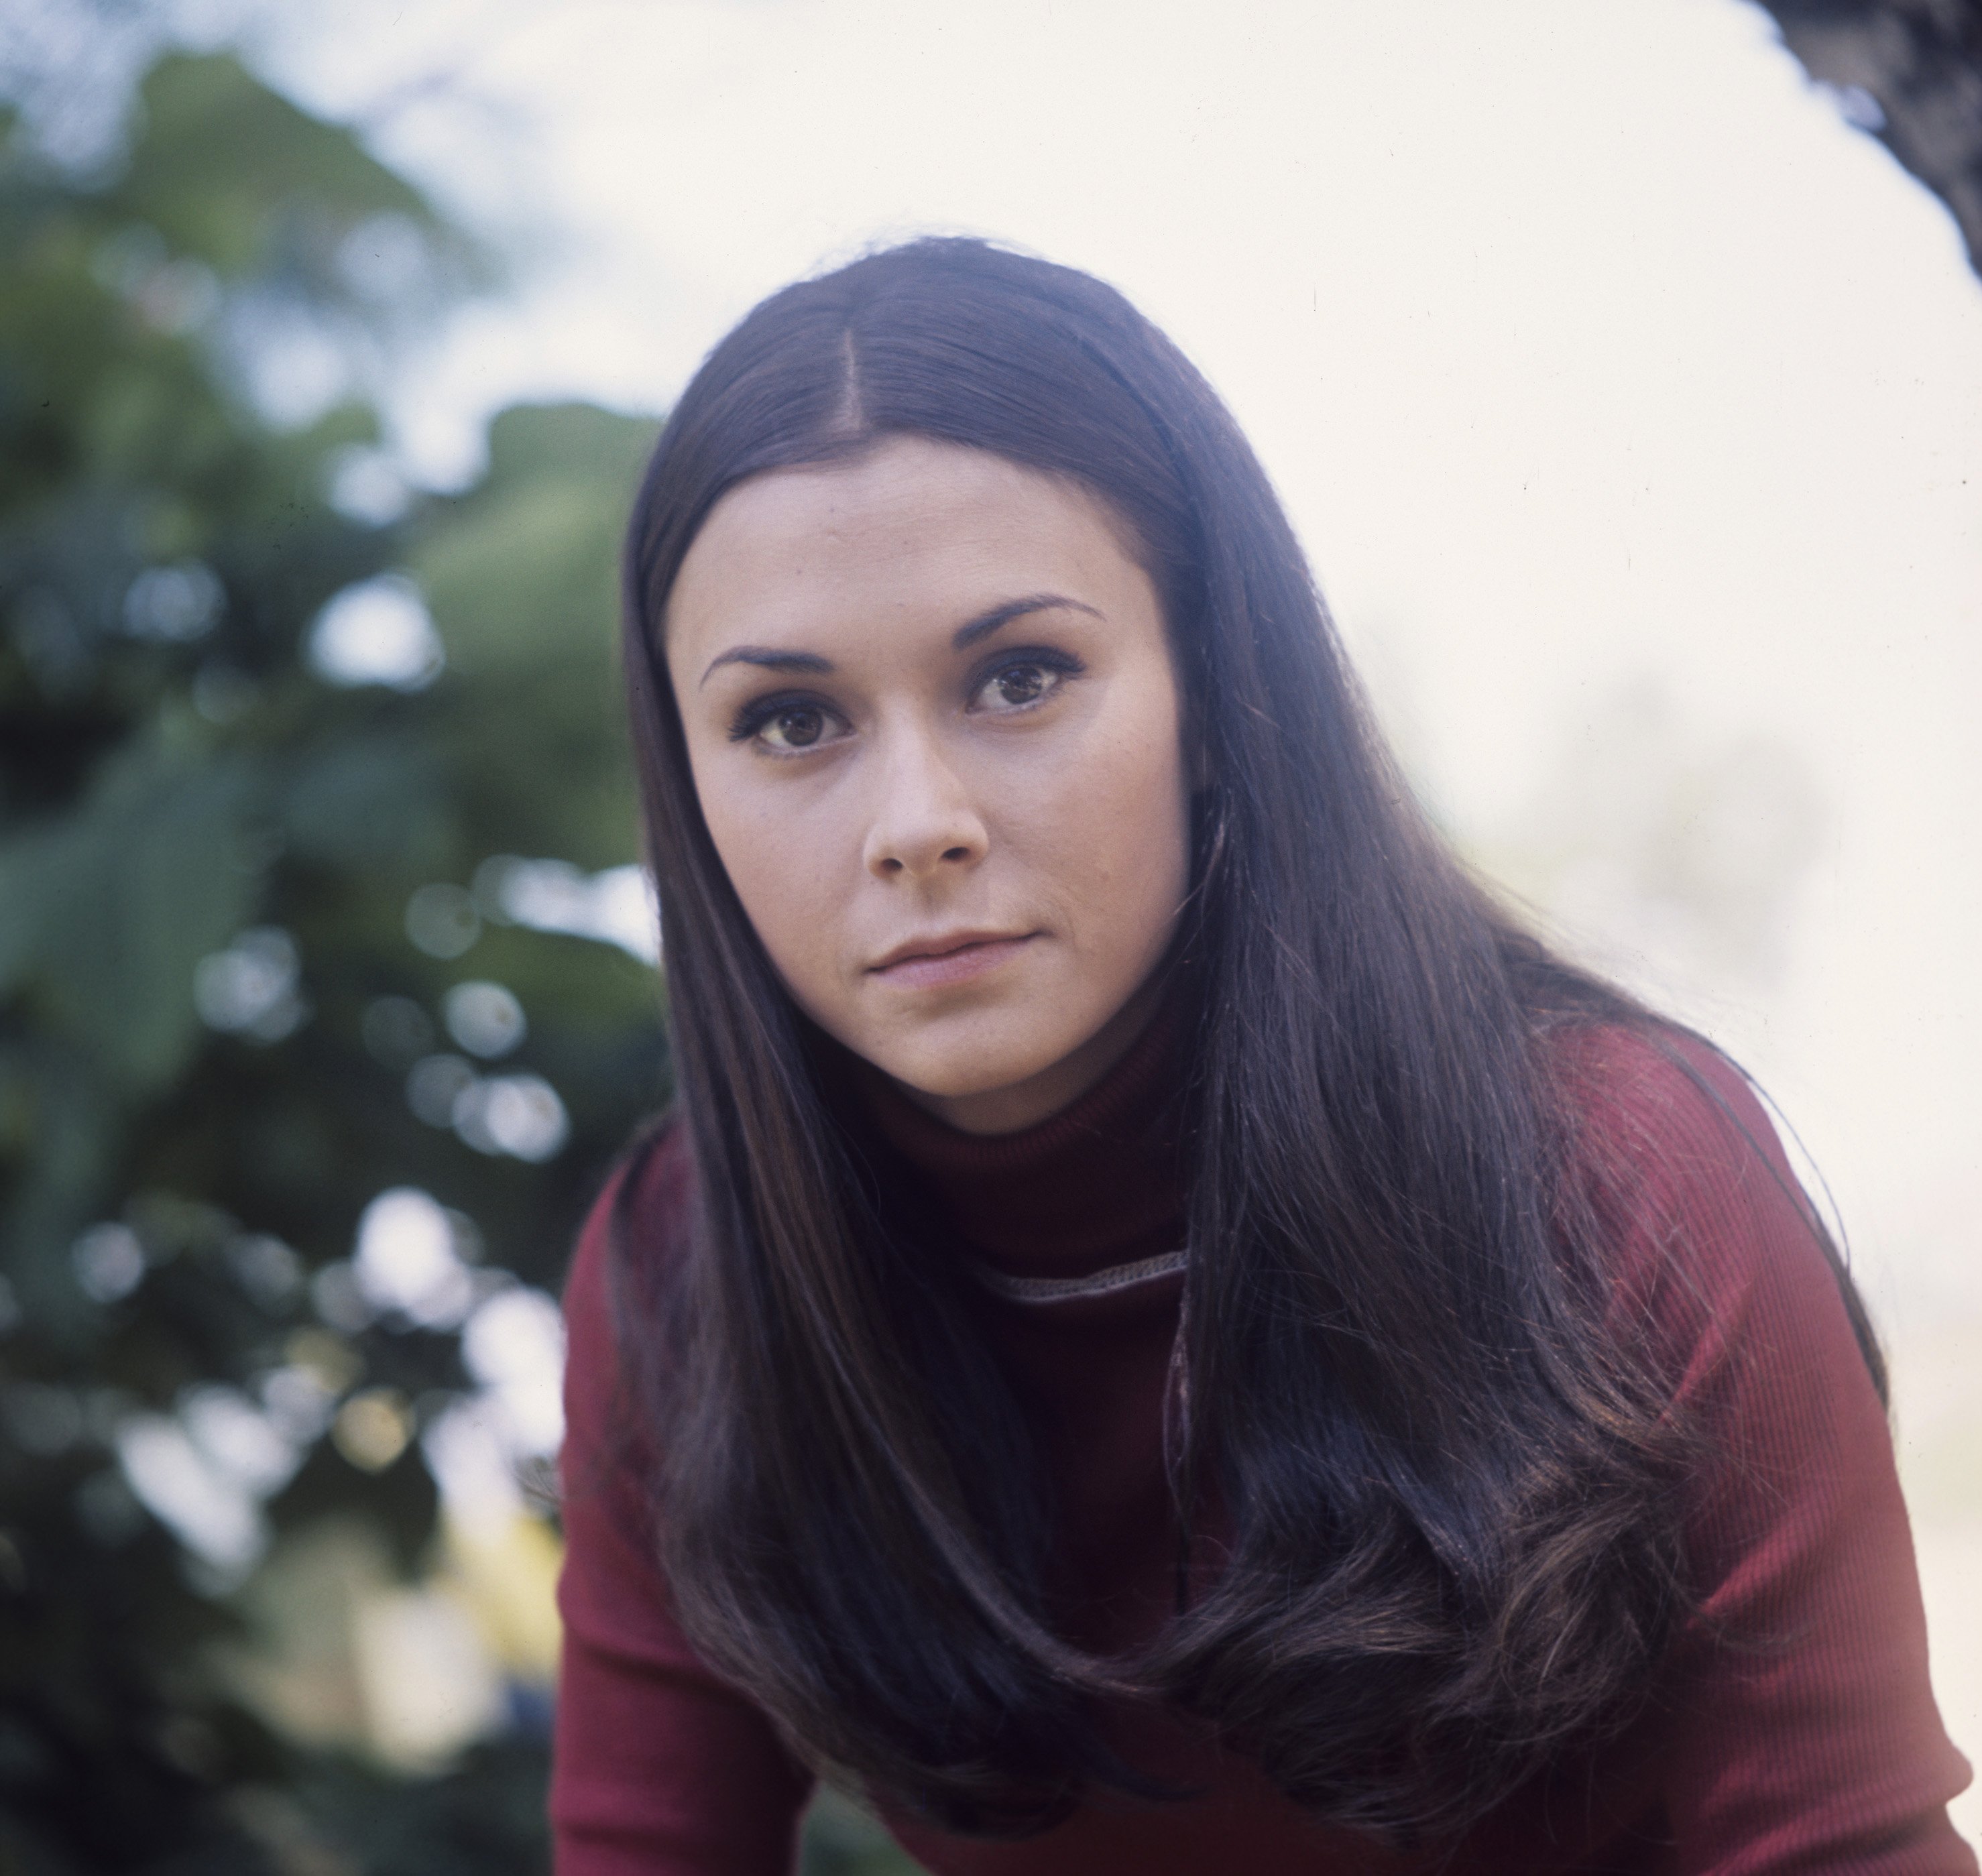 Kate Jackson on the set of "THE ROOKIES" in 1972. | Source: Getty Images